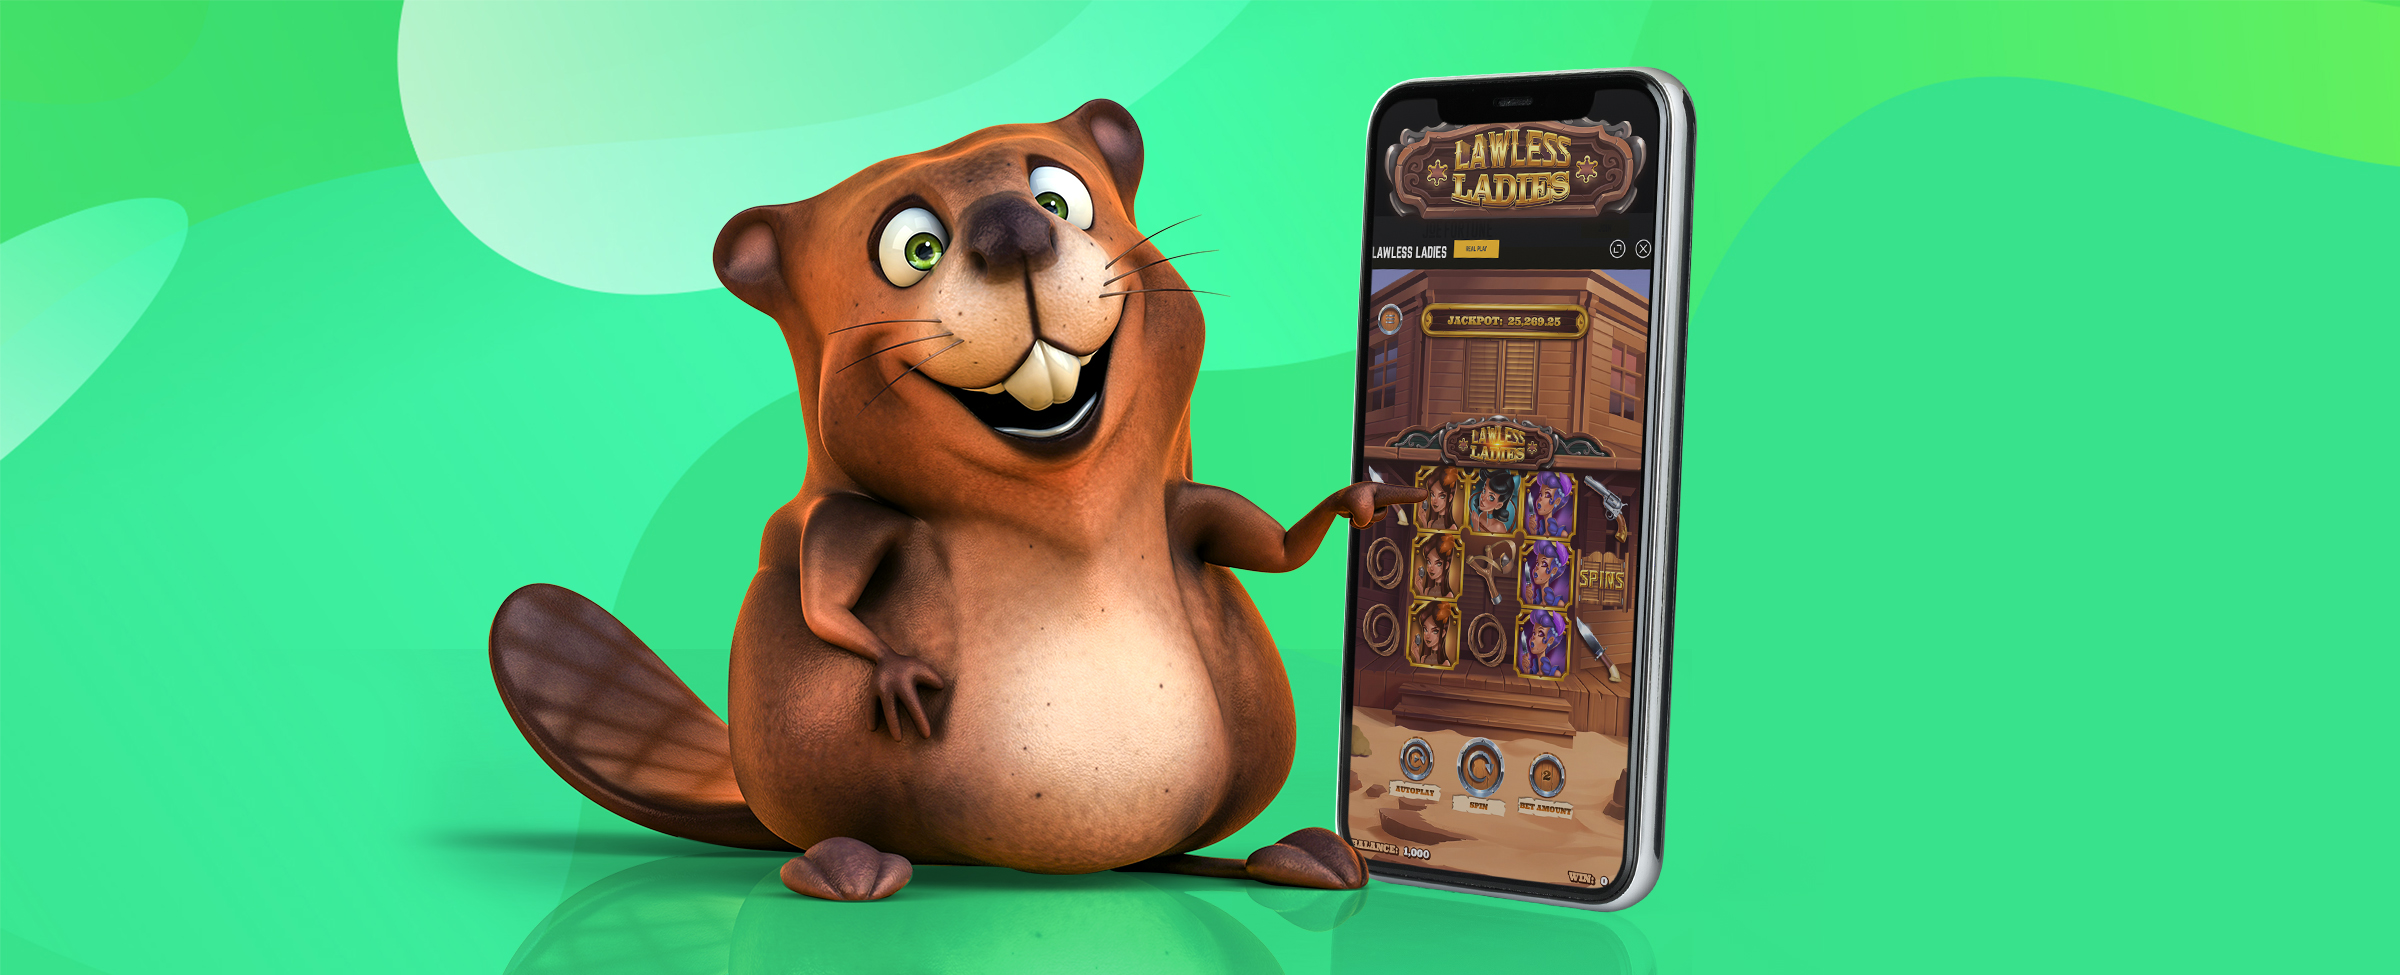 We see a 3D-animated squirrel with two large, bucked teeth and white eyes, holding up a mobile phone the same size as its body. On the screen is a screenshot from the SlotsLV slots game Lawless Ladies. Behind, is a green multi-toned abstract background.